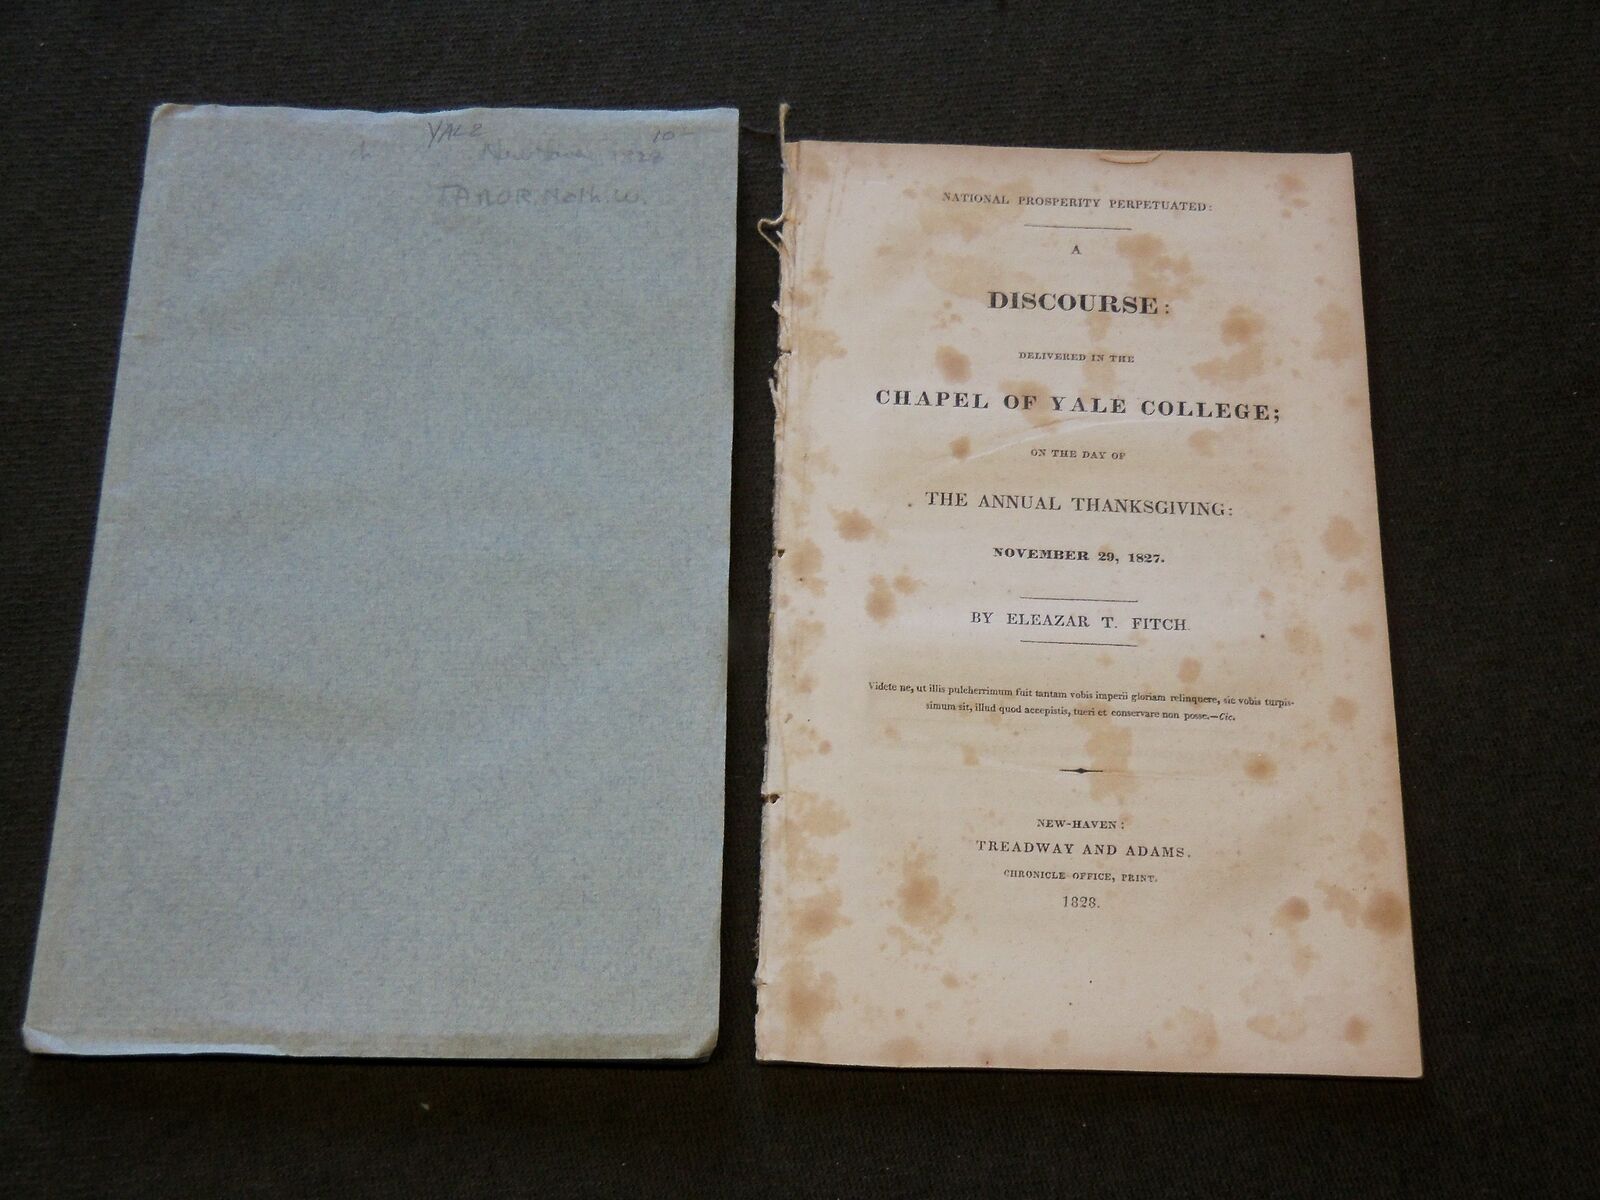 1828 CHAPEL OF YALE COLLEGE SERMON LOT OF 2 ISSUES - J 6169